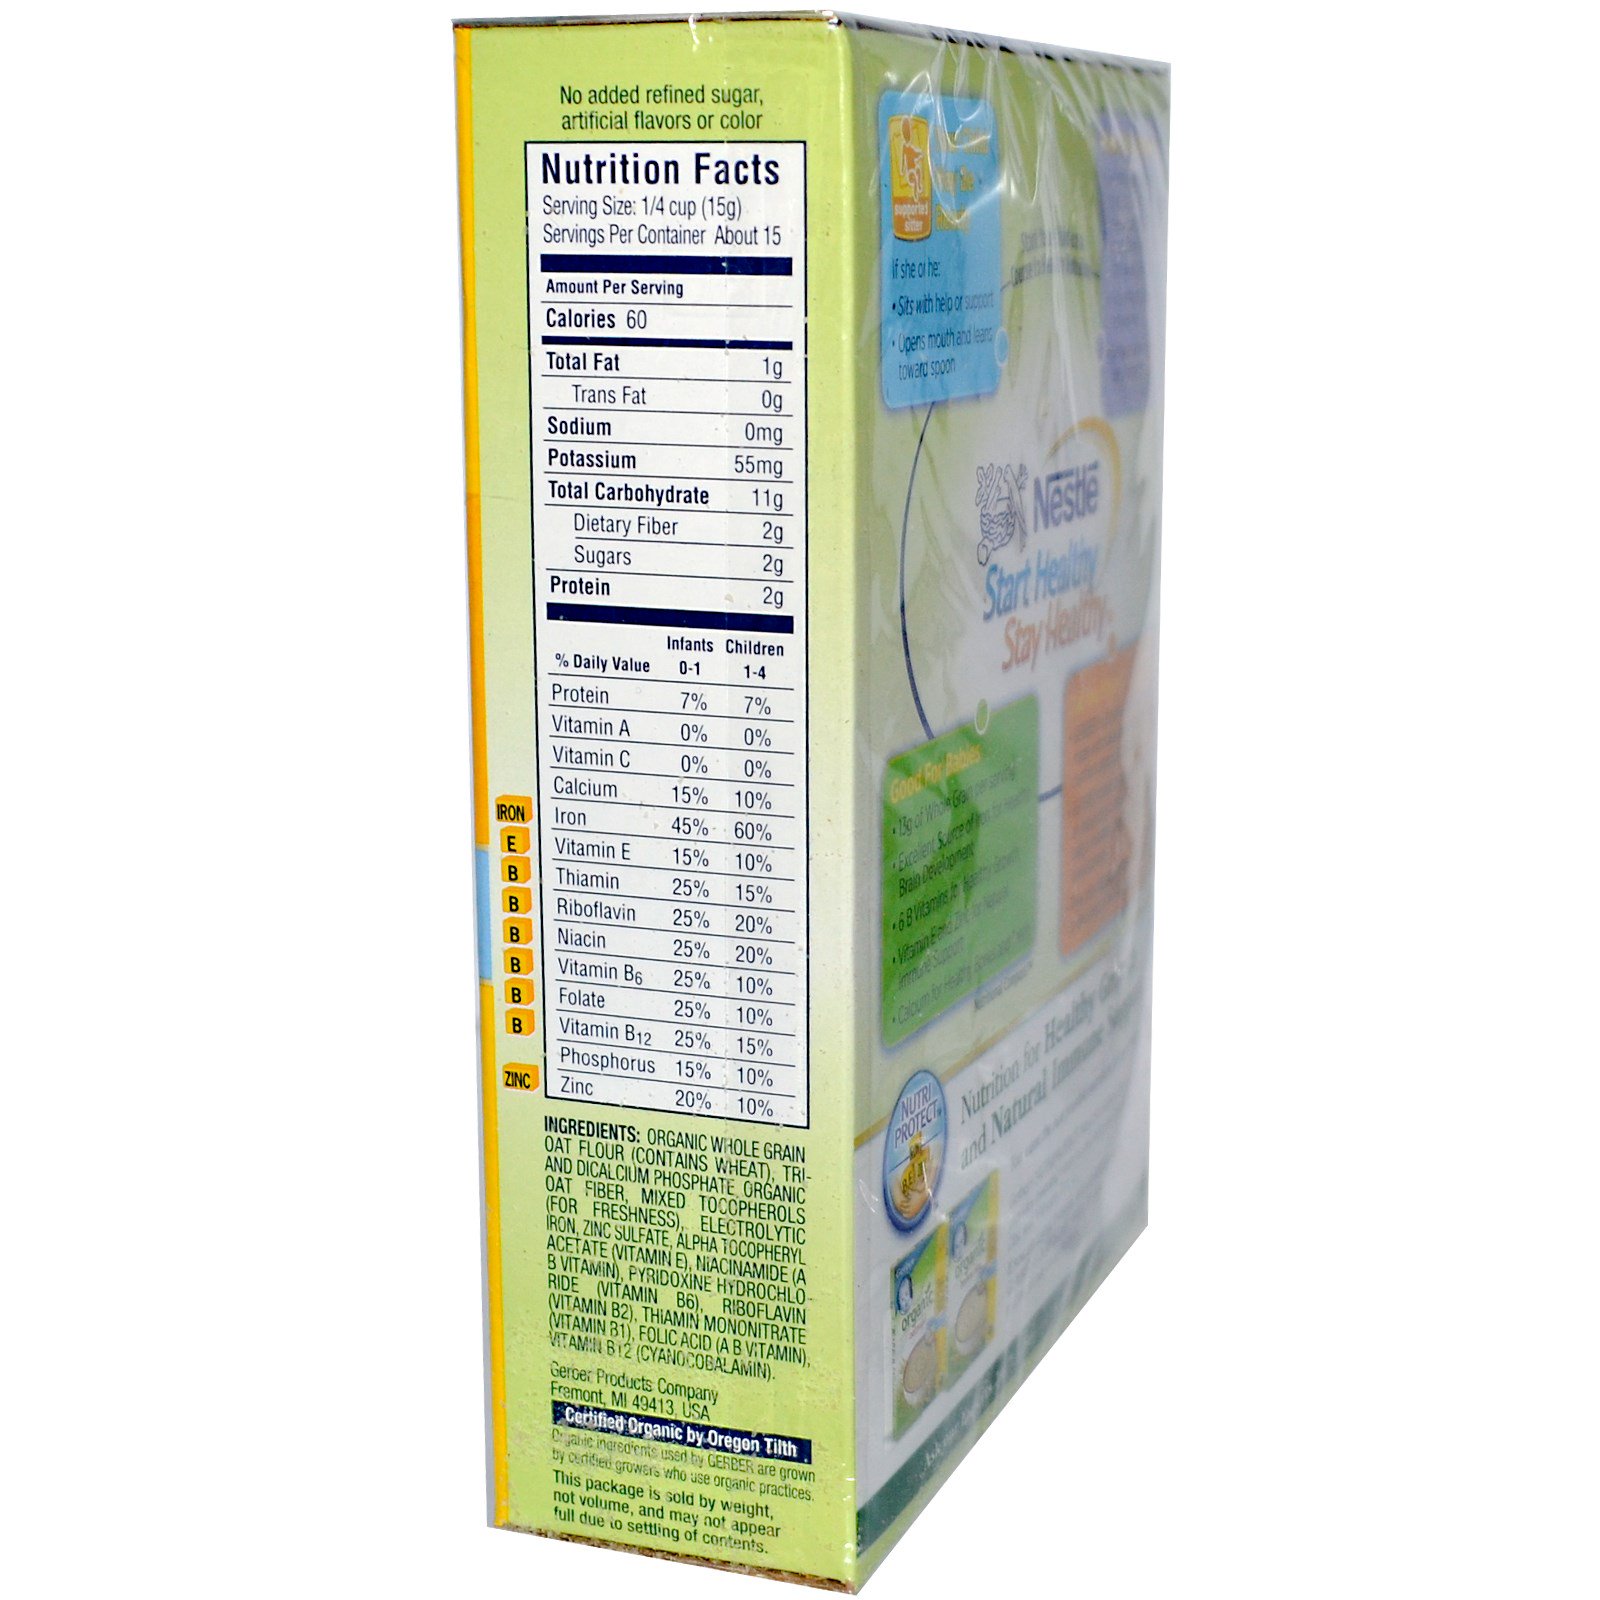 nutritional value of baby cereal